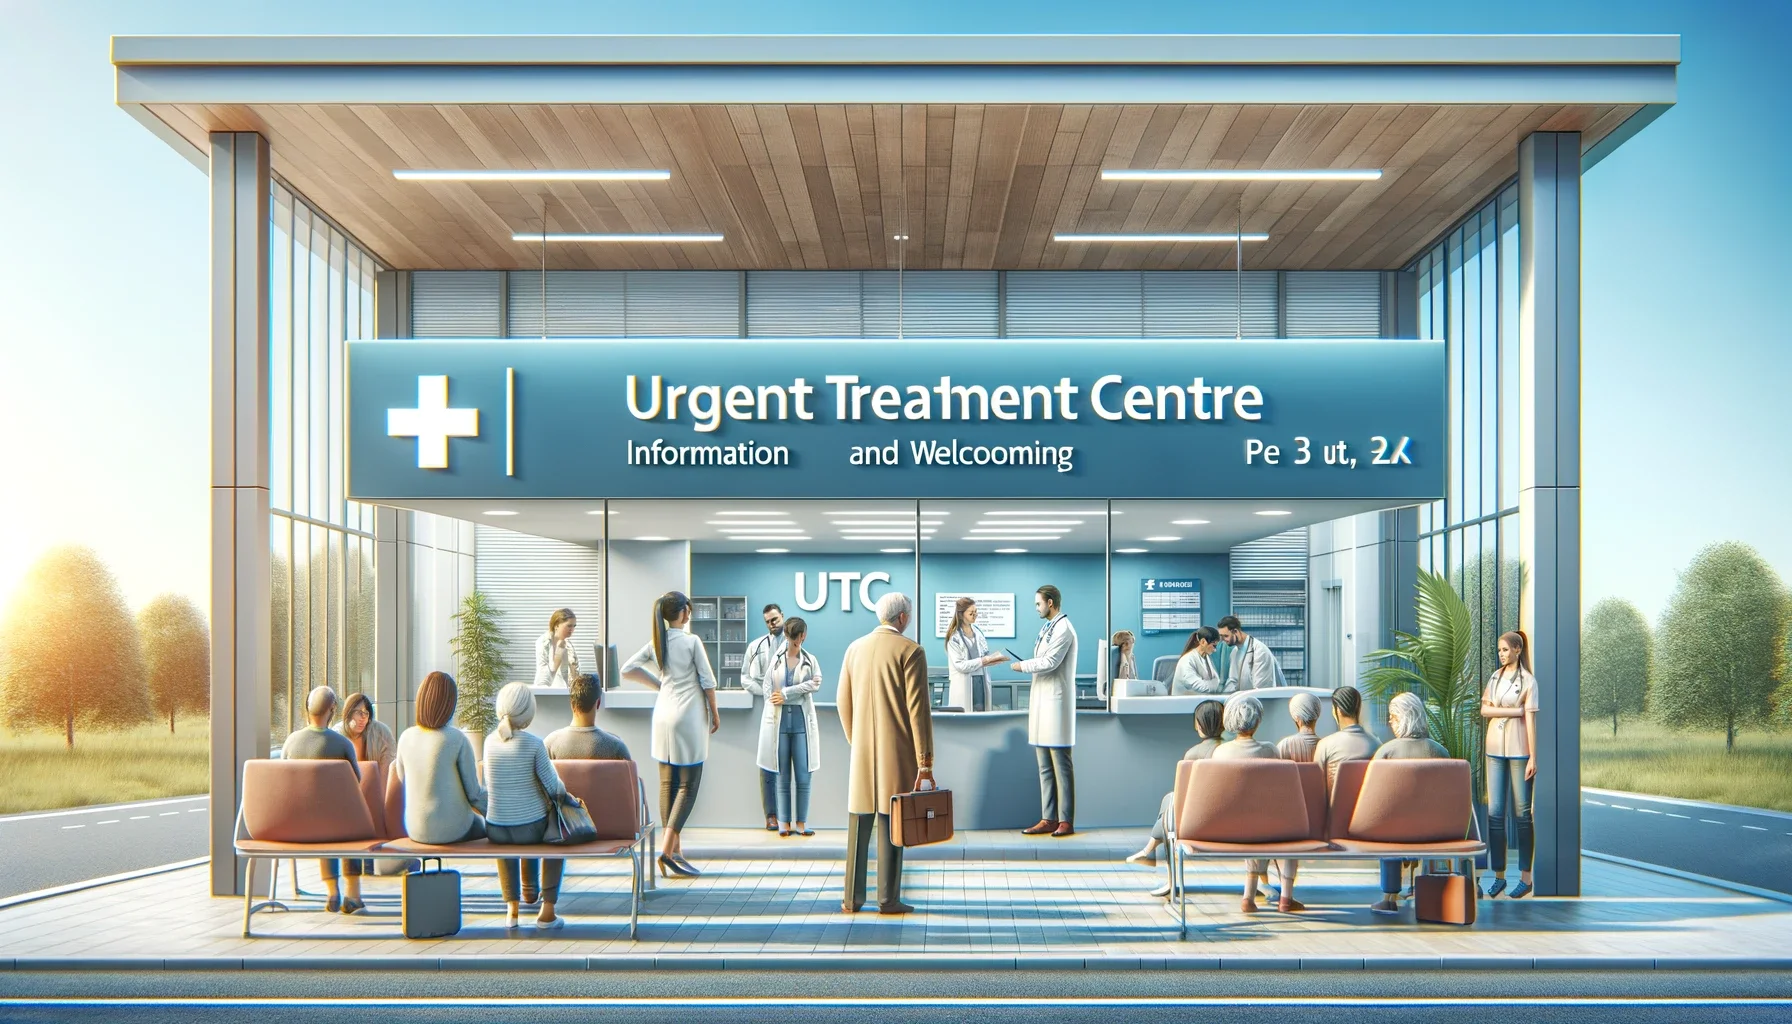 An informative and welcoming image for a healthcare blog, featuring an Urgent Treatment Centre (UTC) with a welcoming atmosphere